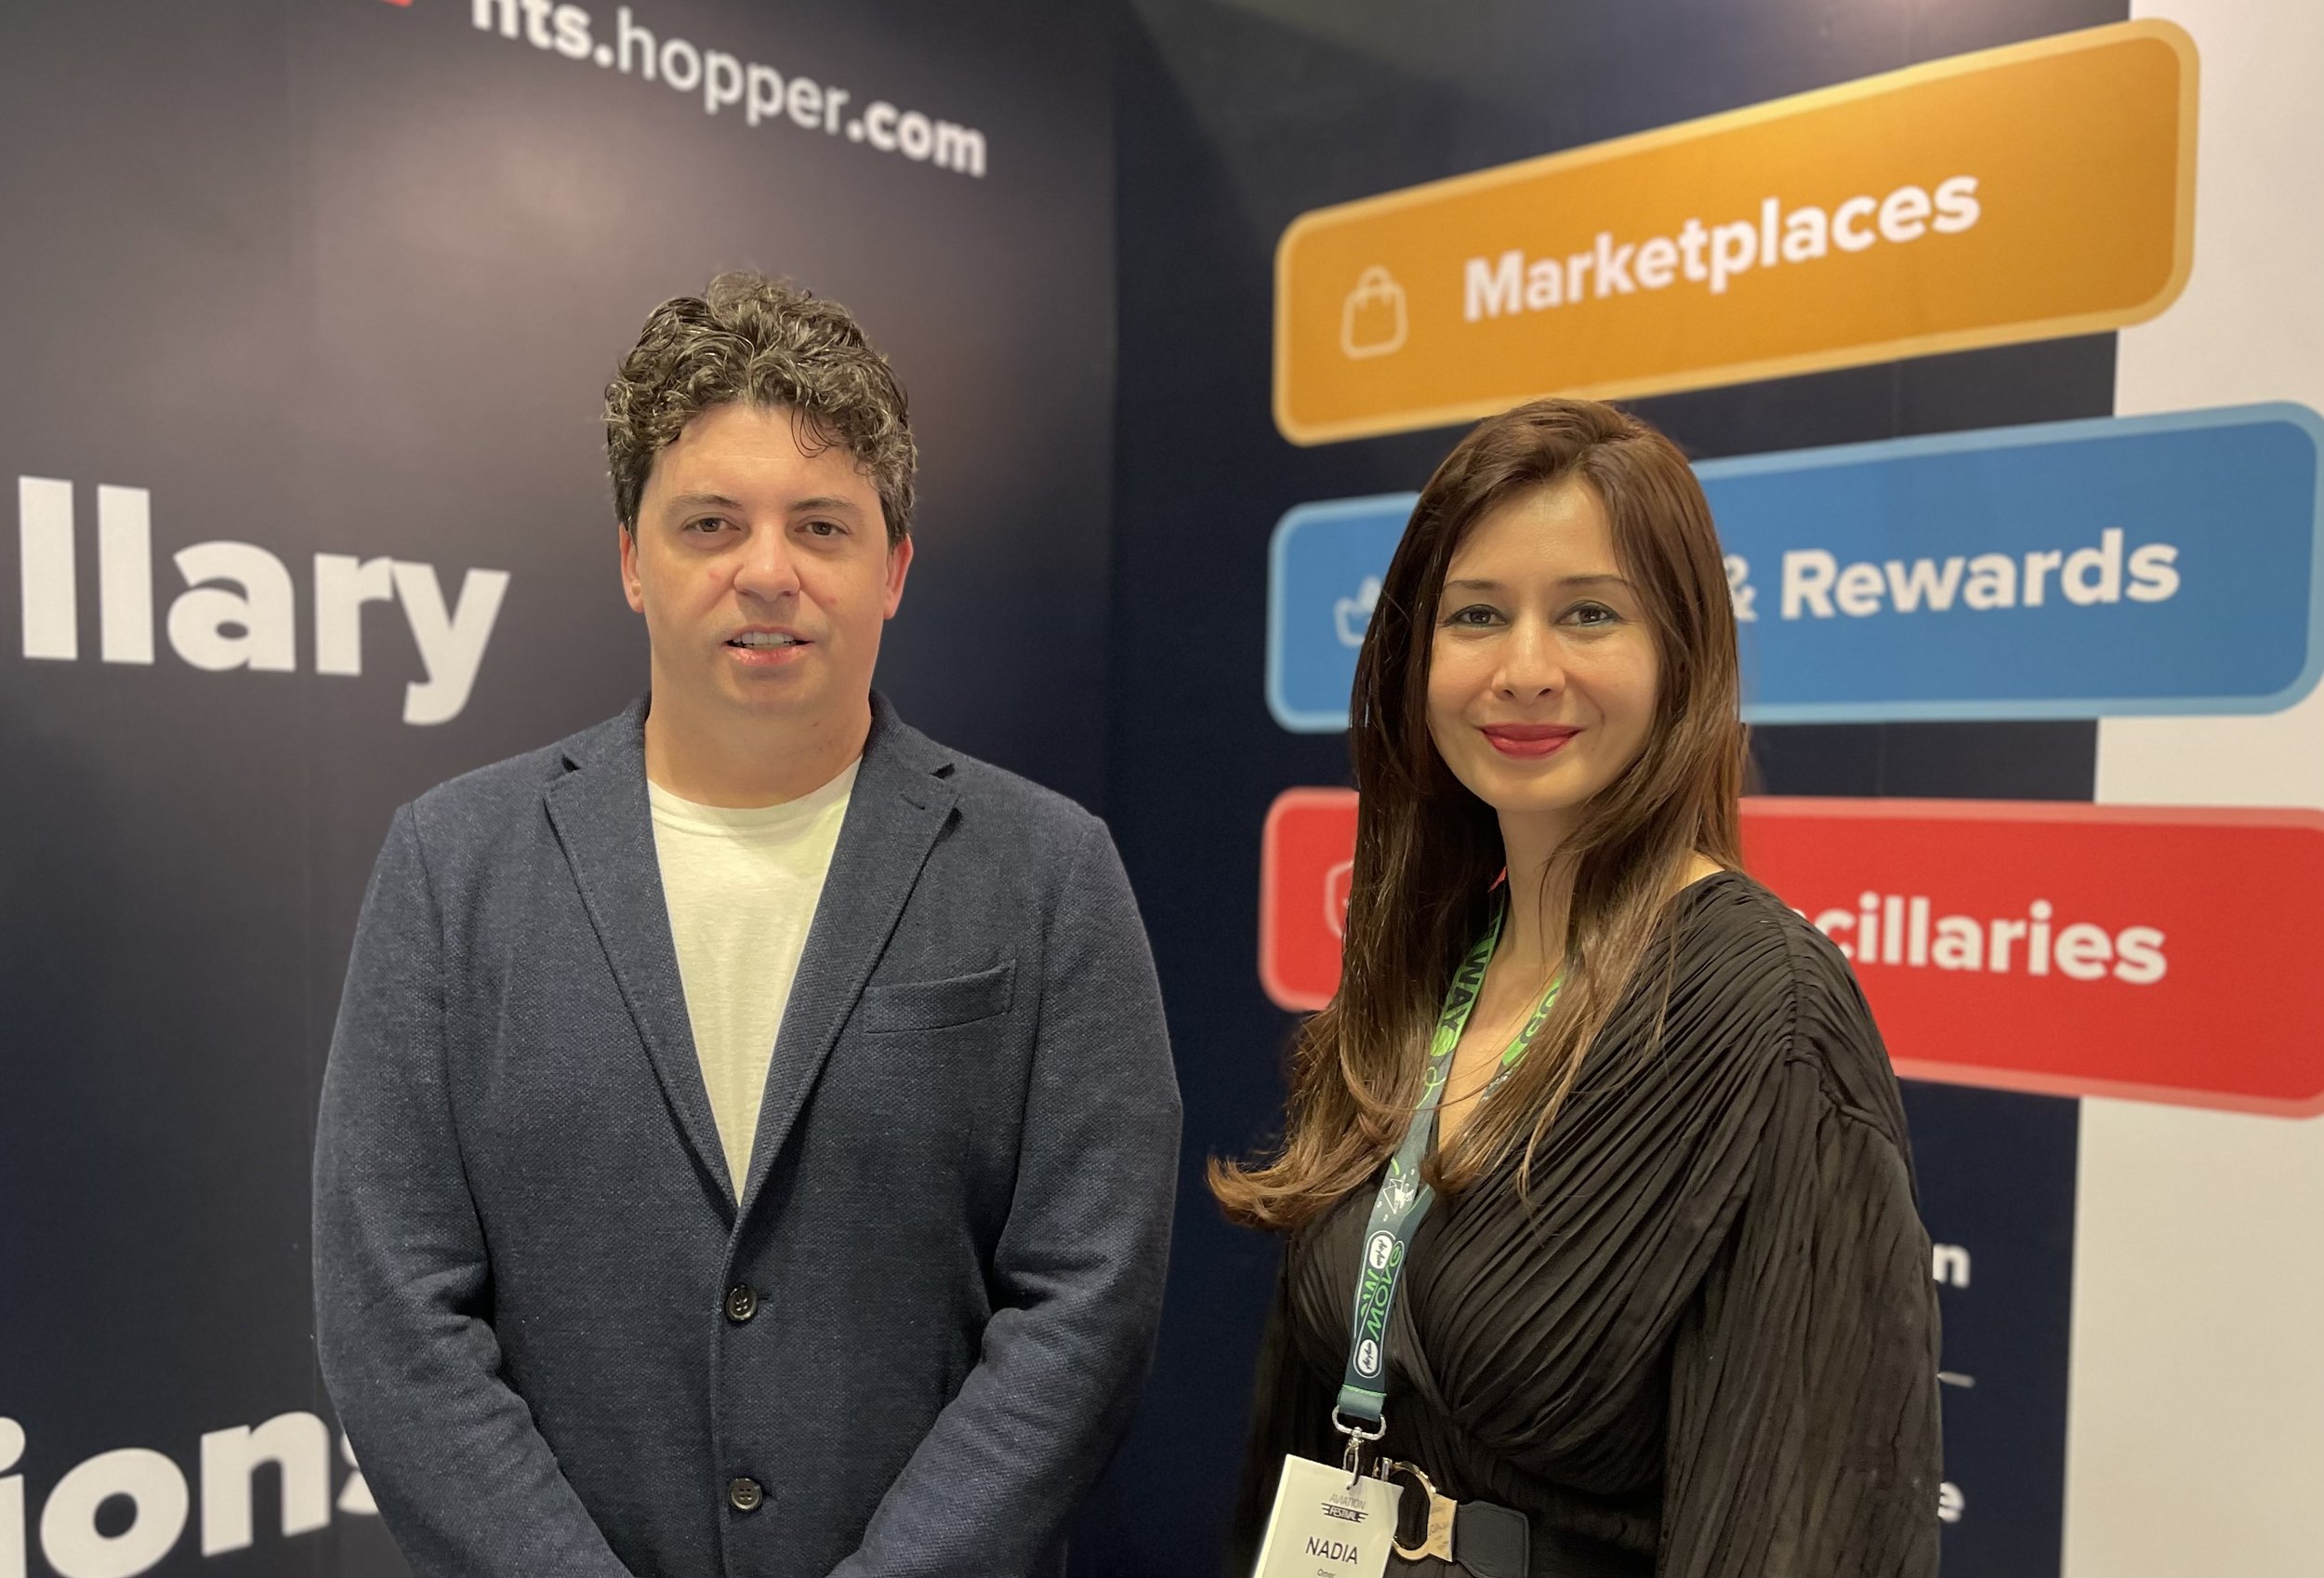  Photo caption: Dakota Smith, President &amp; Co-Founder, Hopper and Nadia Omer, CEO AirAsia MOVE, commemorating the exciting partnership between both companies! Cancel for Any Reason powered by HTS will launch later this year, bringing HTS’s market-